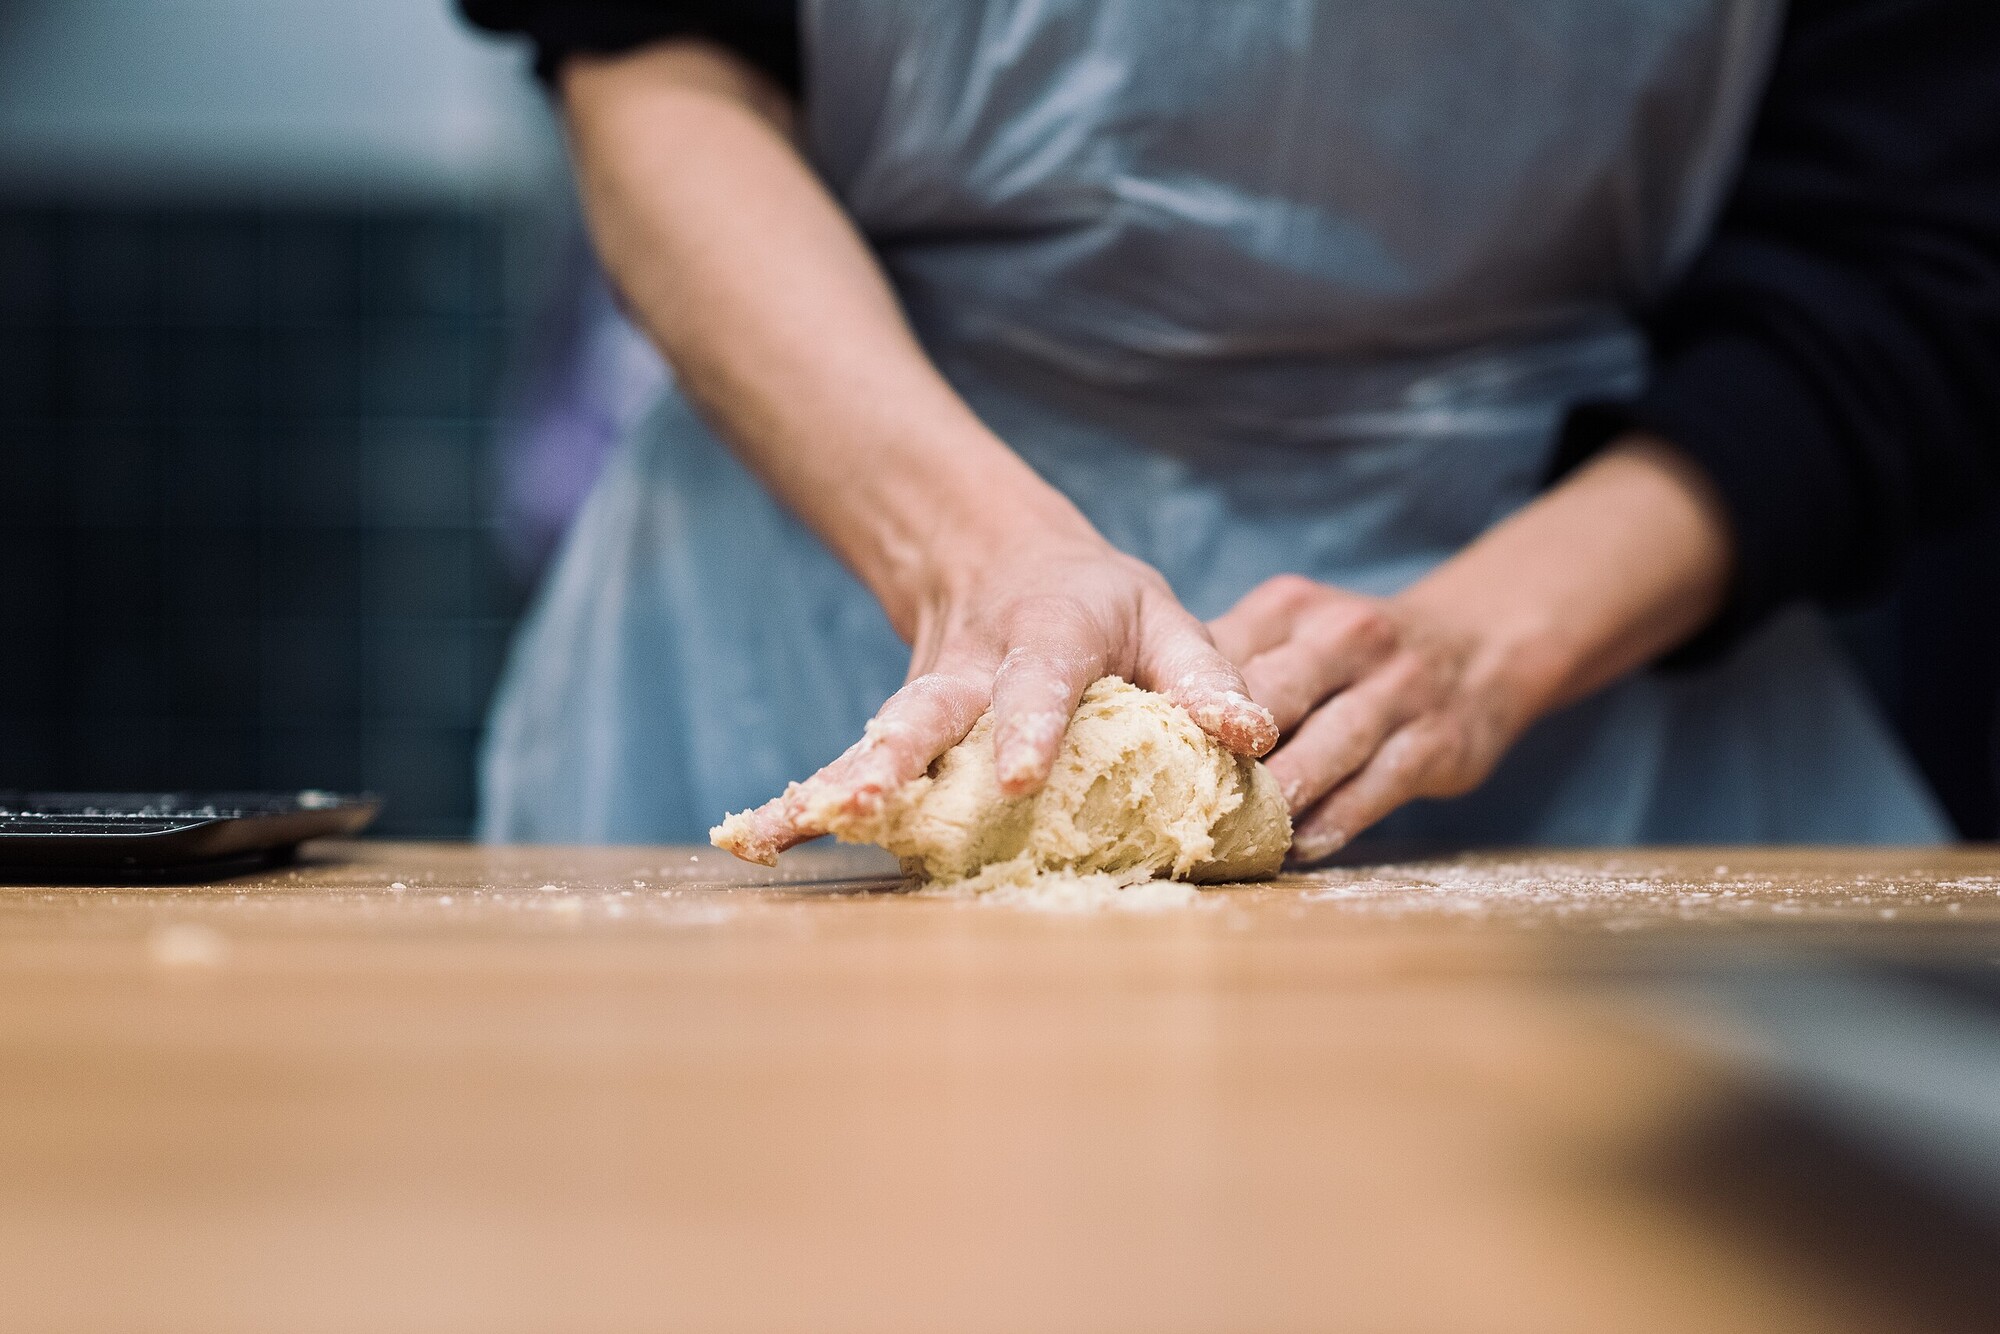 Photograph of the hands of a baker handling dough for bread.